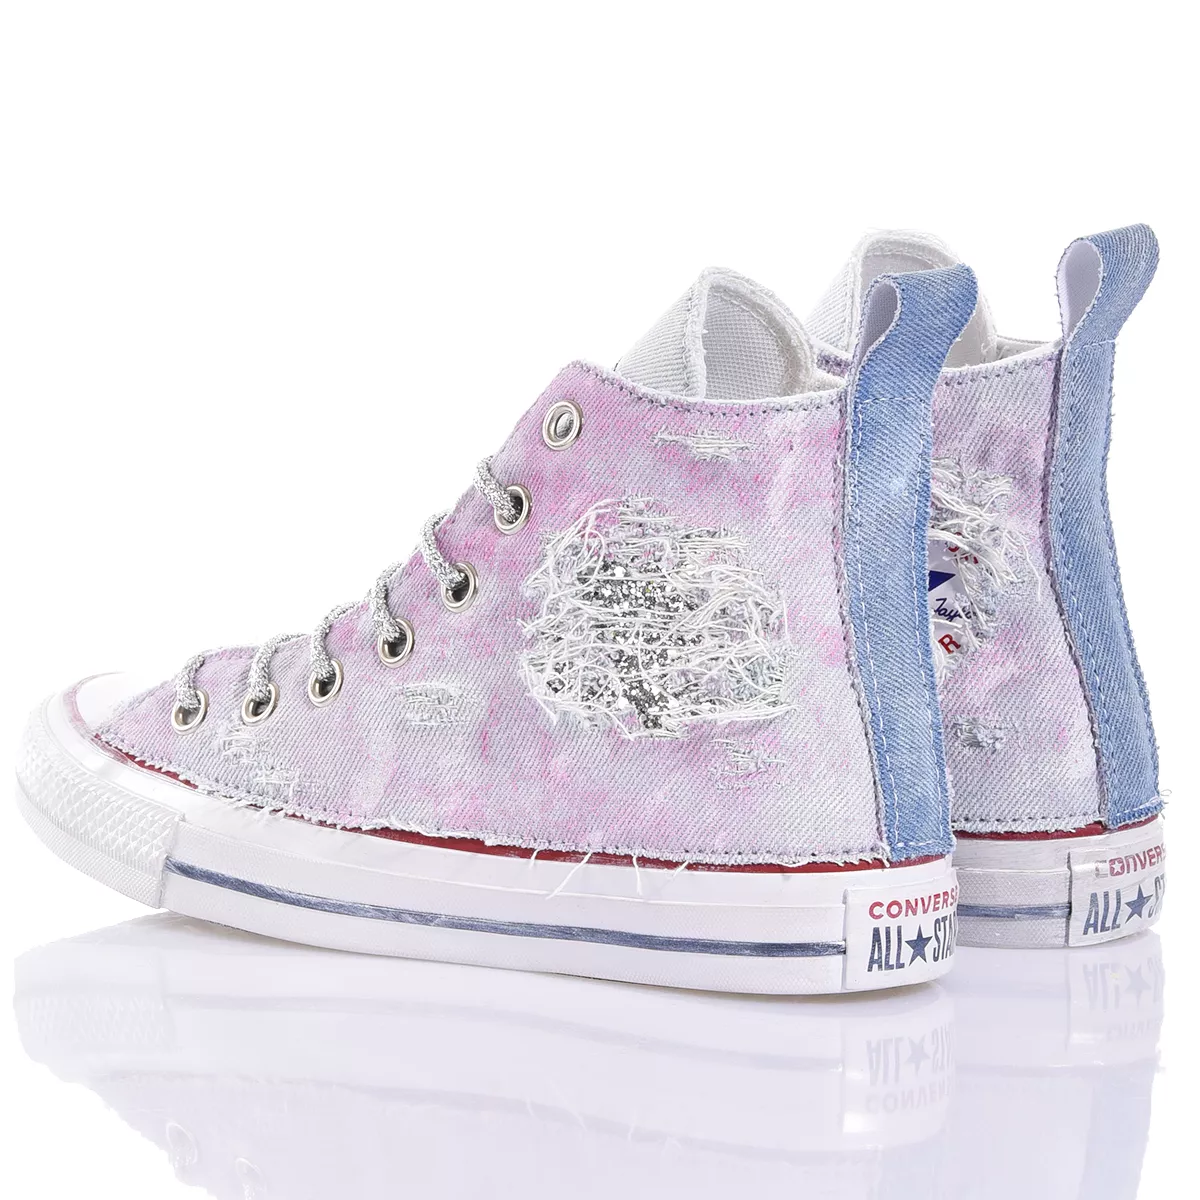 Converse Denim Glitter High Top Washed-out, brokat, Special